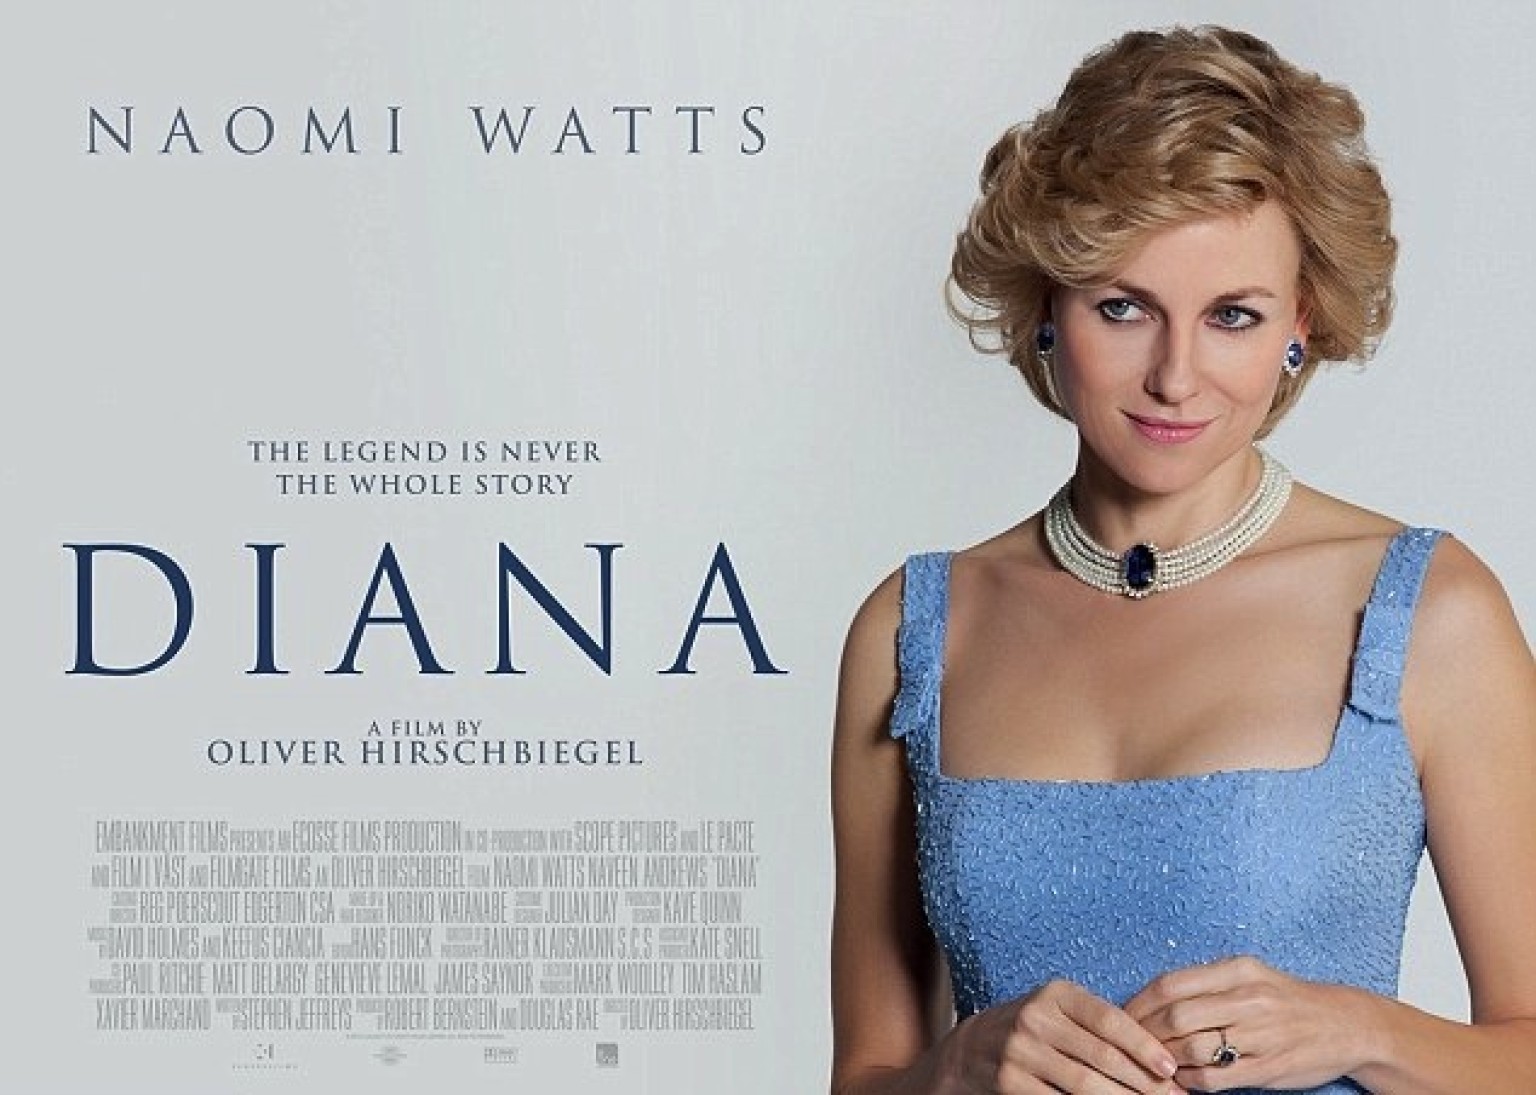 'Diana' Film Poster Released With Naomi Watts As The People's Princess